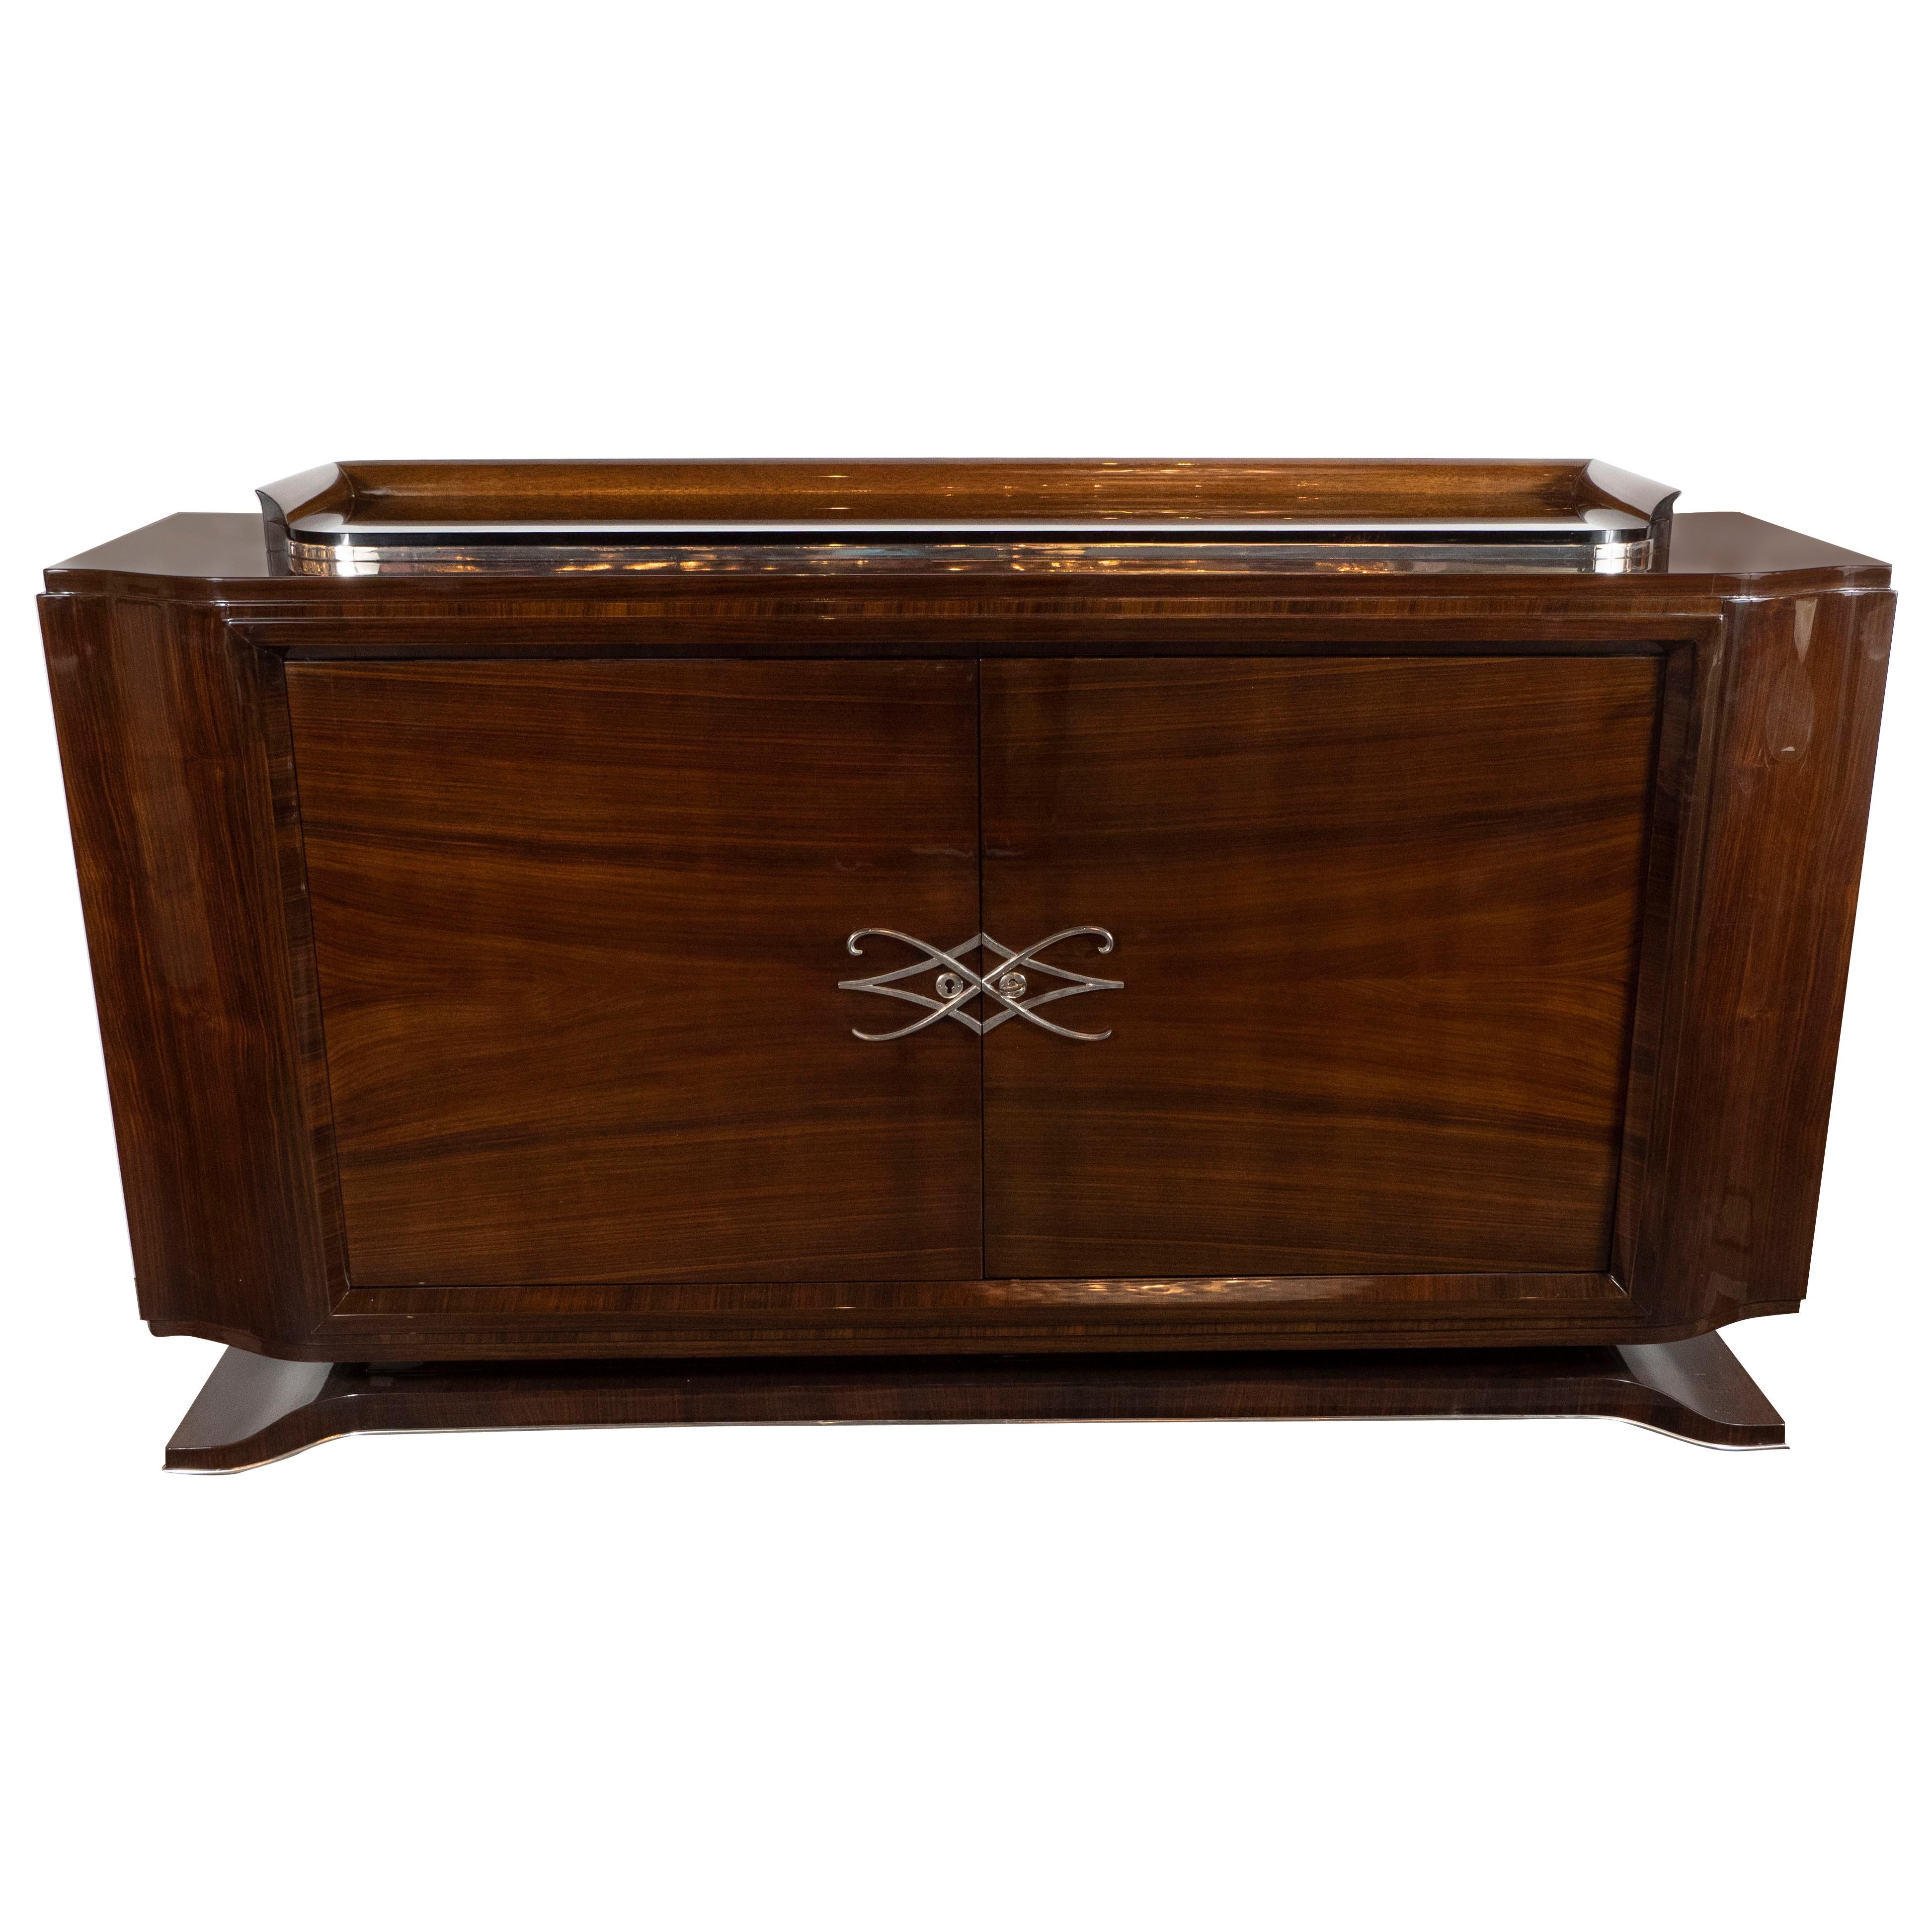 French 1940s Art Deco Bookmatched Walnut Sideboard with Nickeled Bronze Details